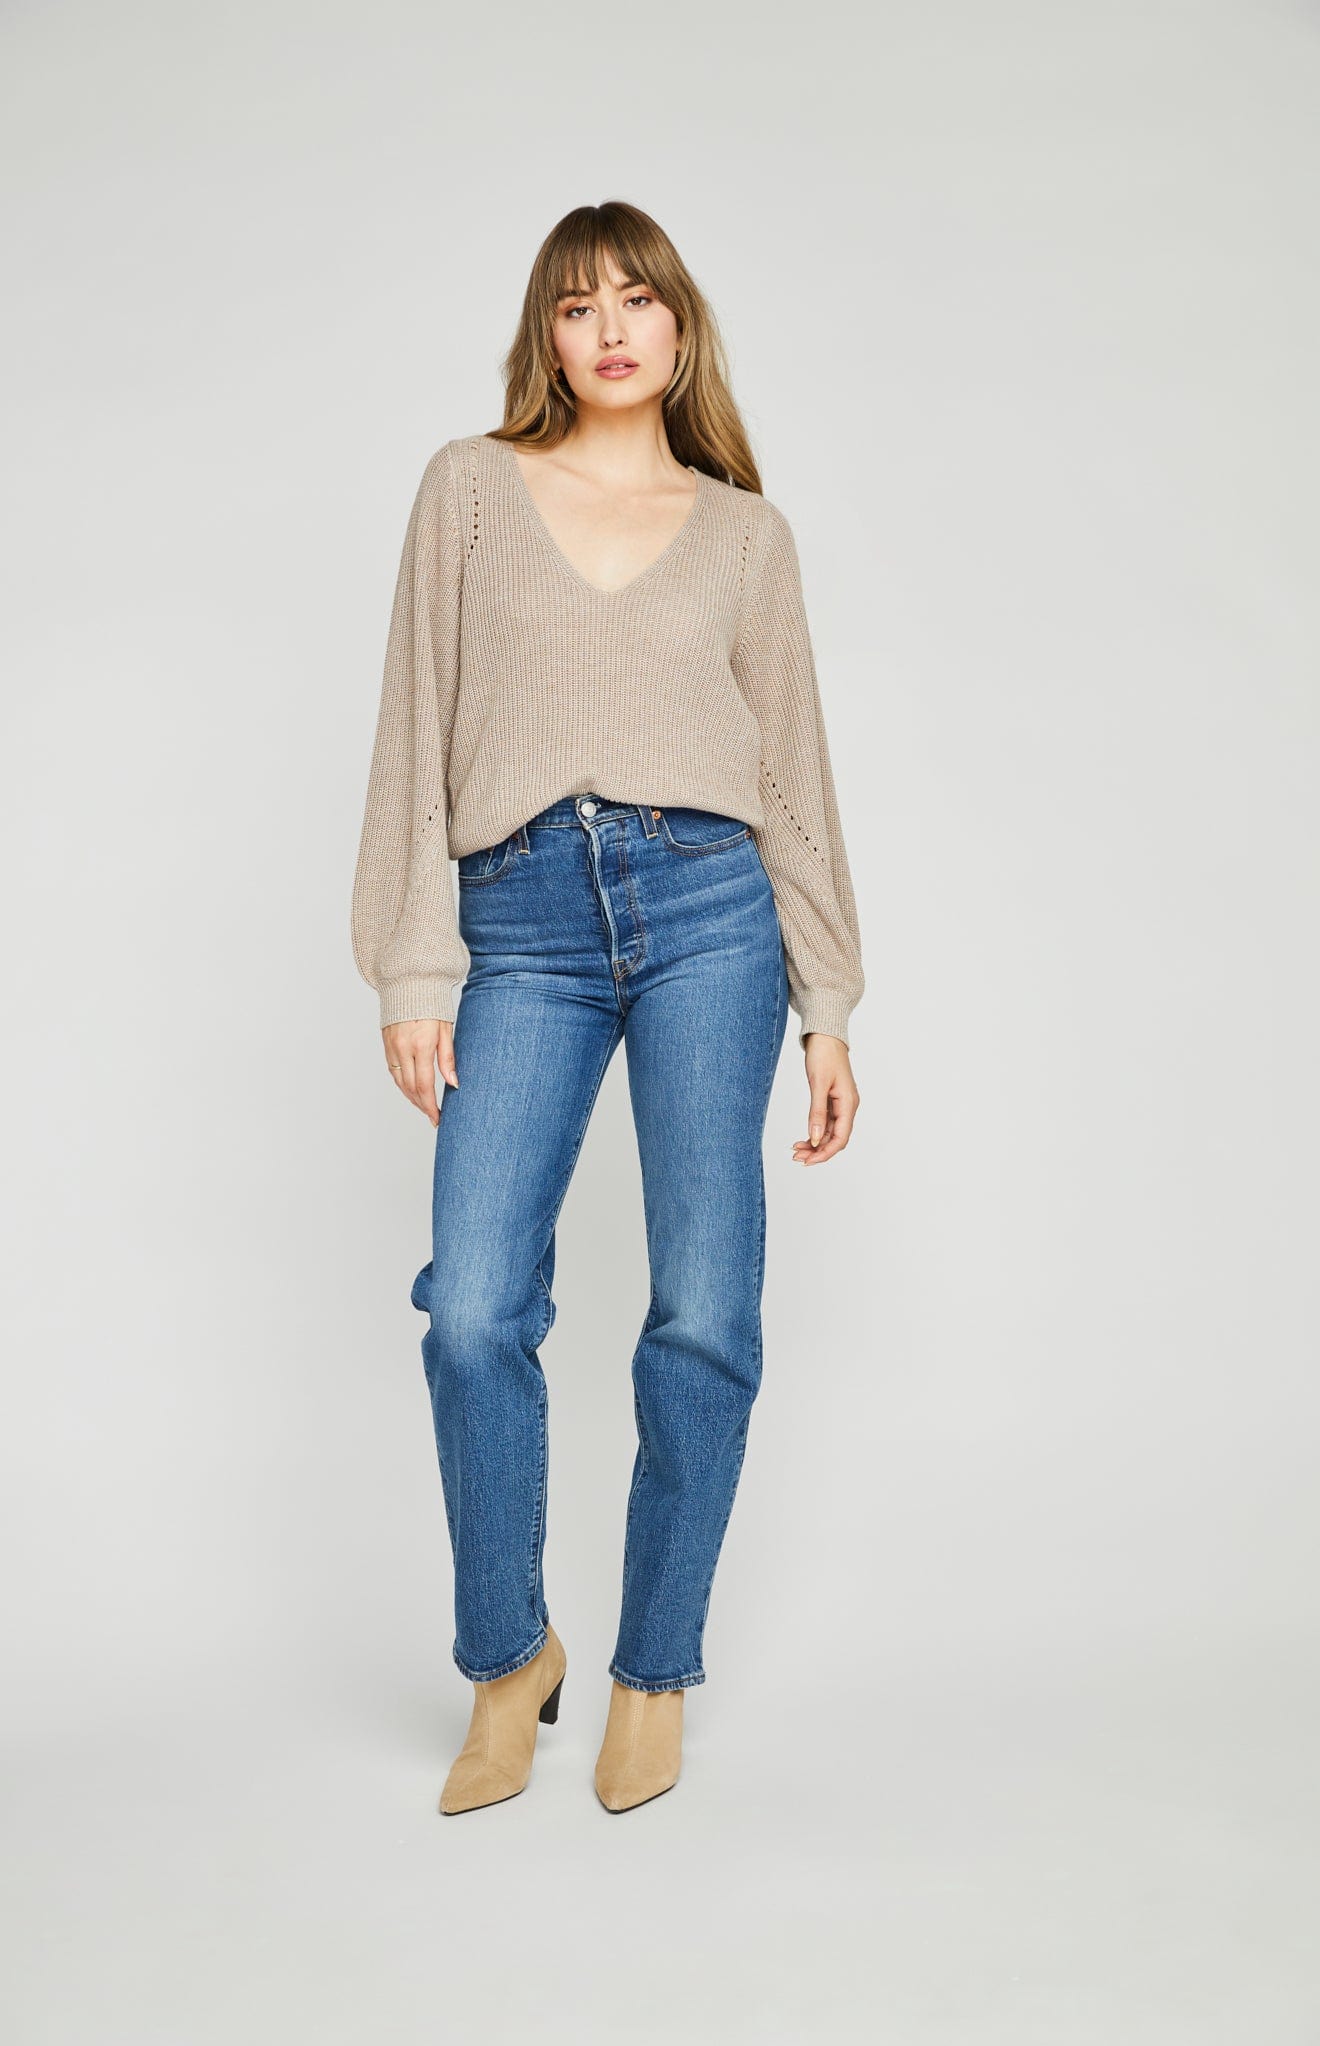 Hailey Pullover in Heather Taupe by Gentle Fawn